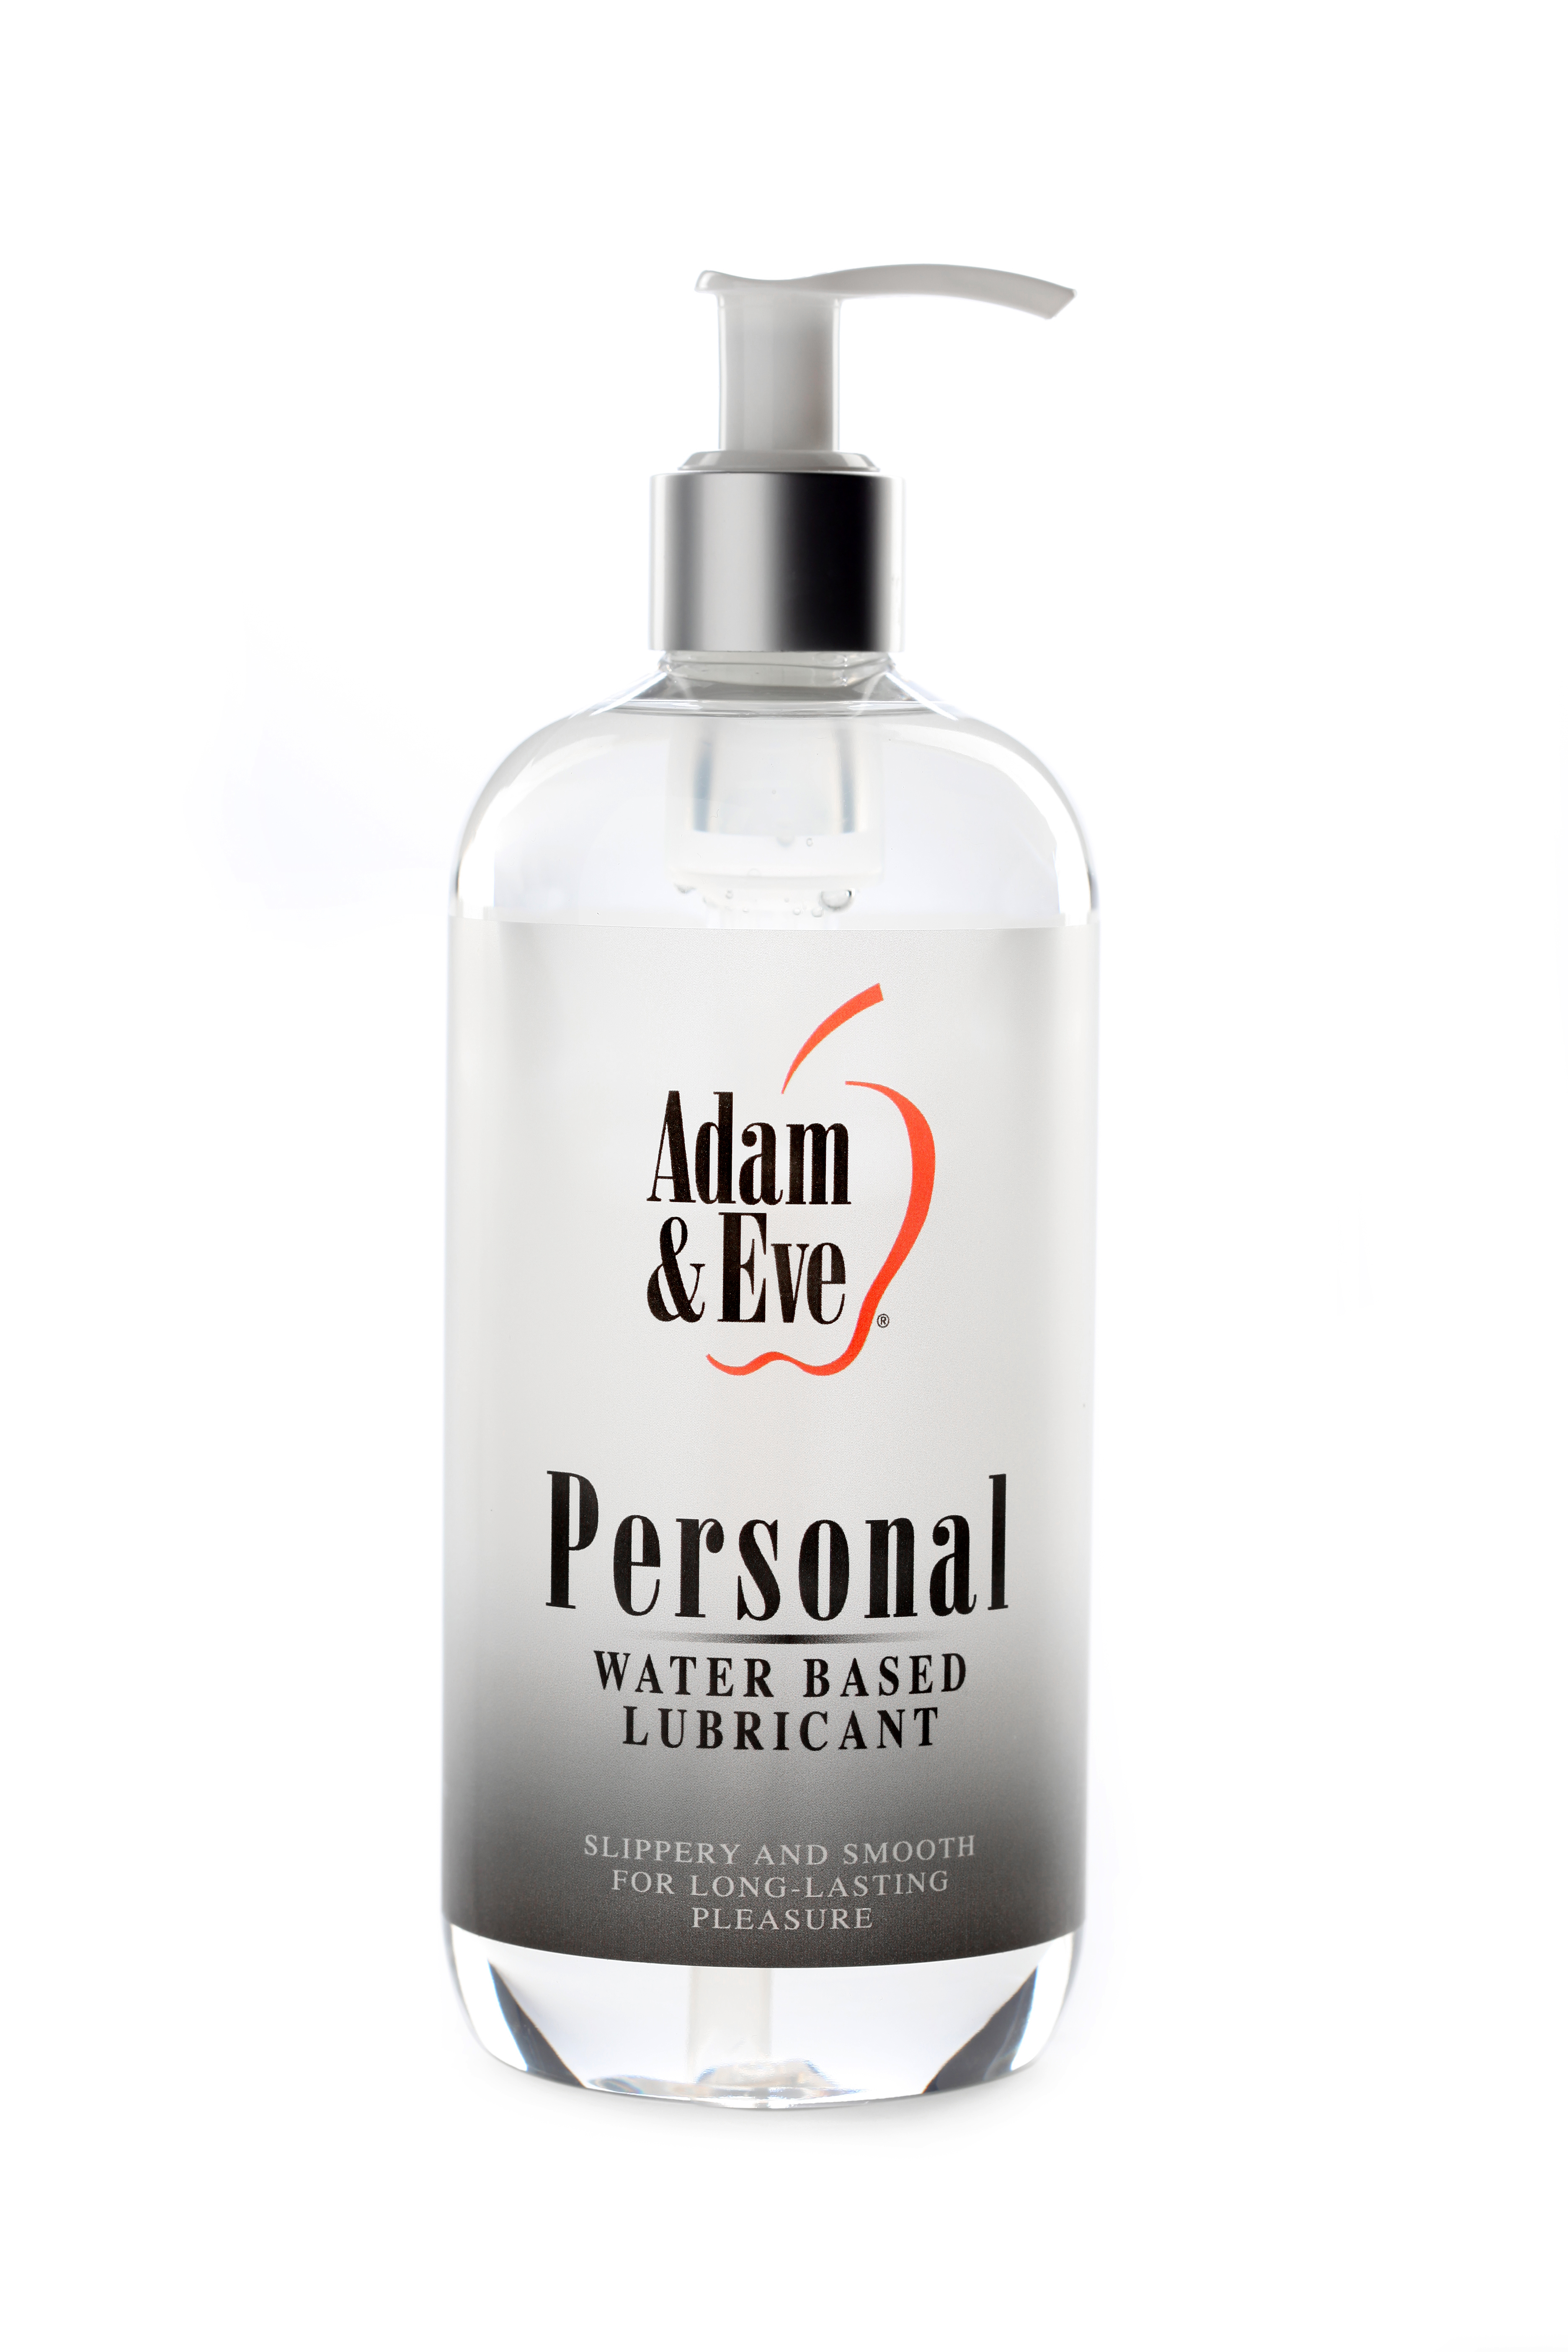 ADAM & EVE PERSONAL WATER BASED LUBE 16 OZ  